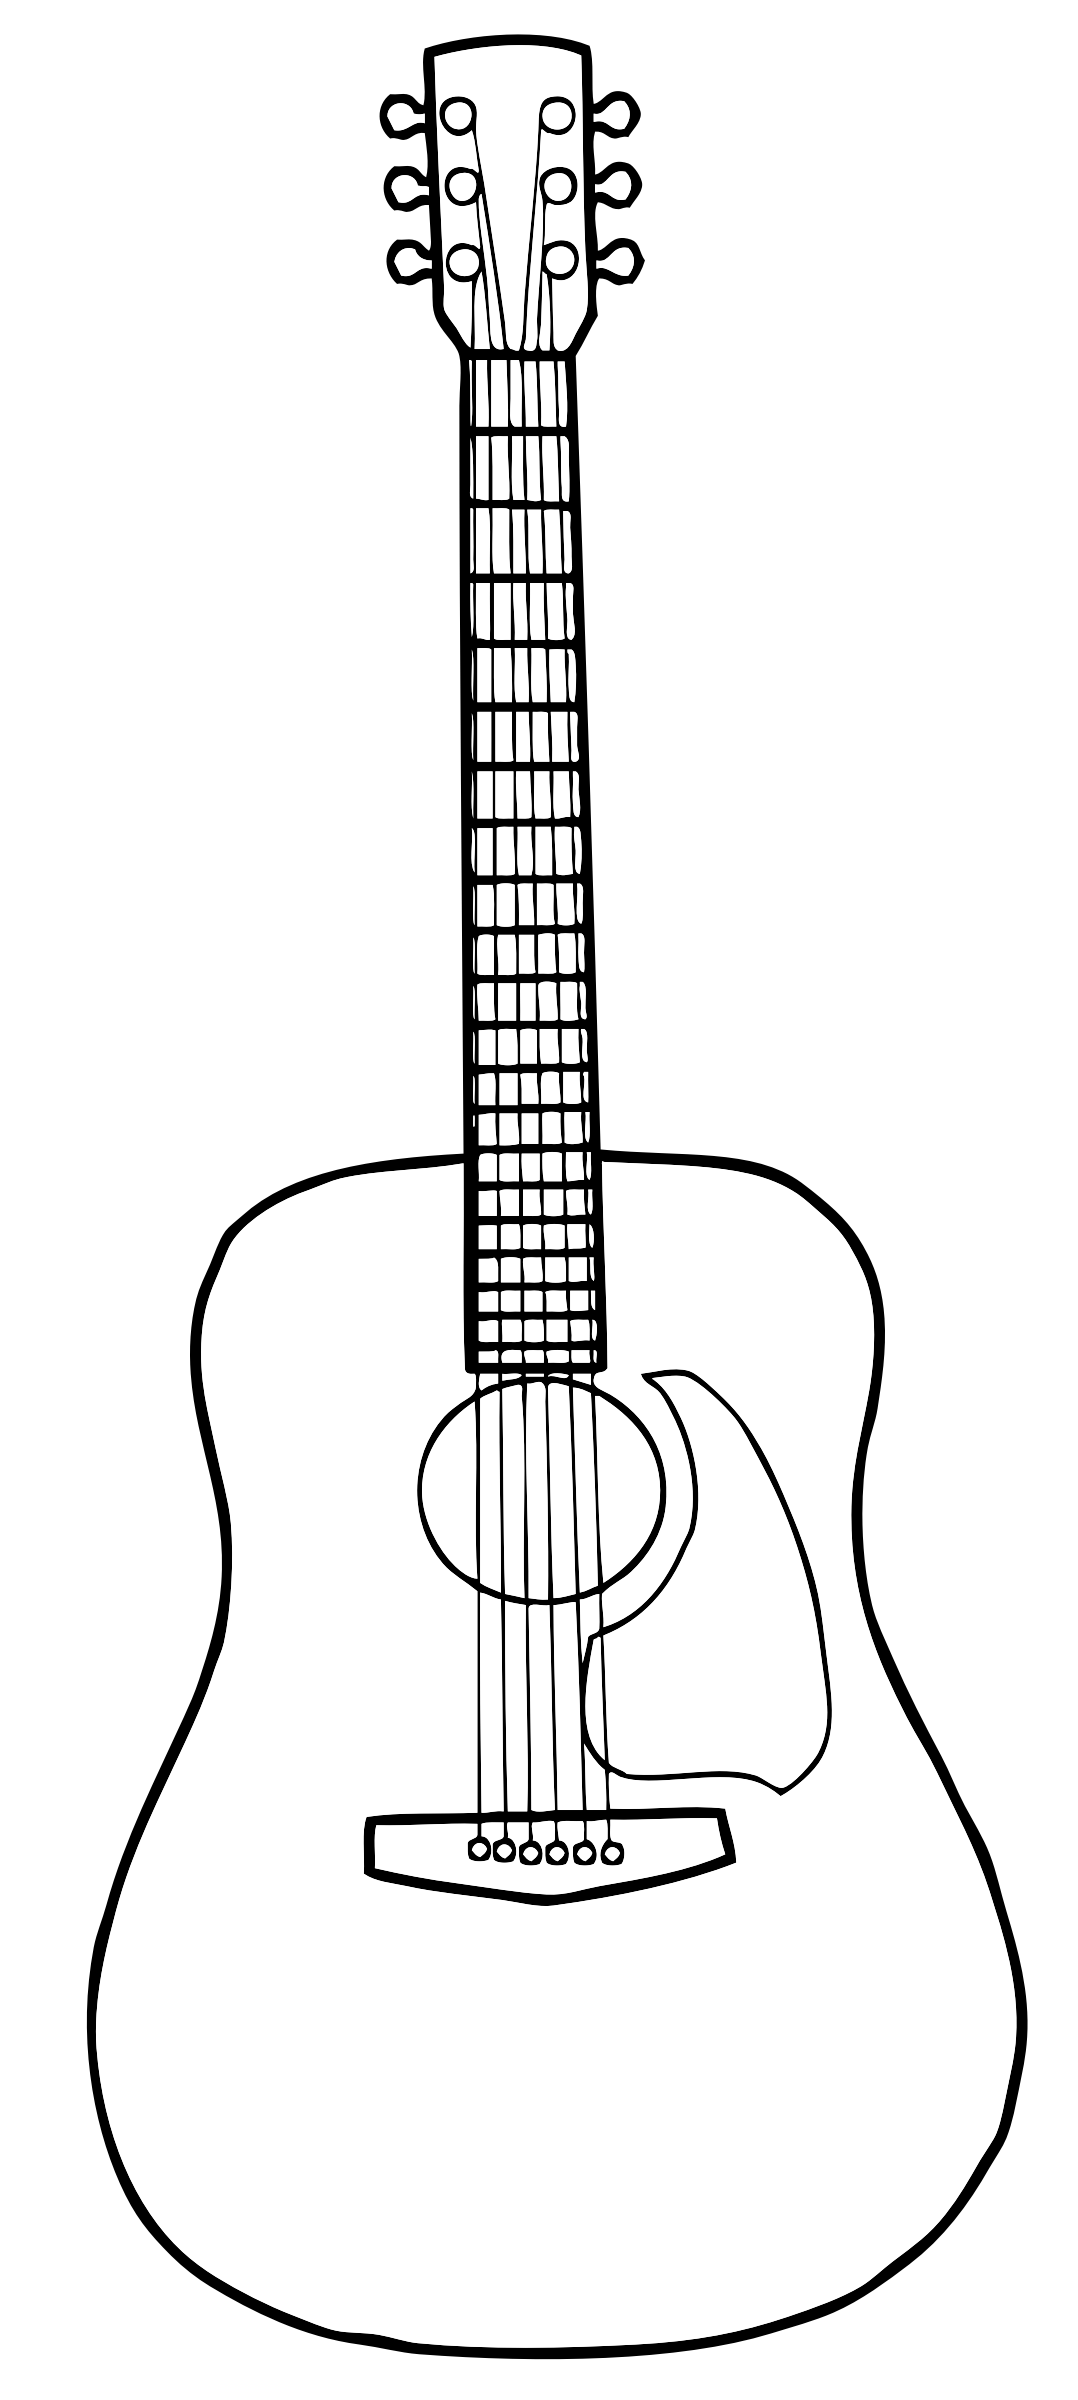 Guitar  black and white guitar clipart black and white freevector